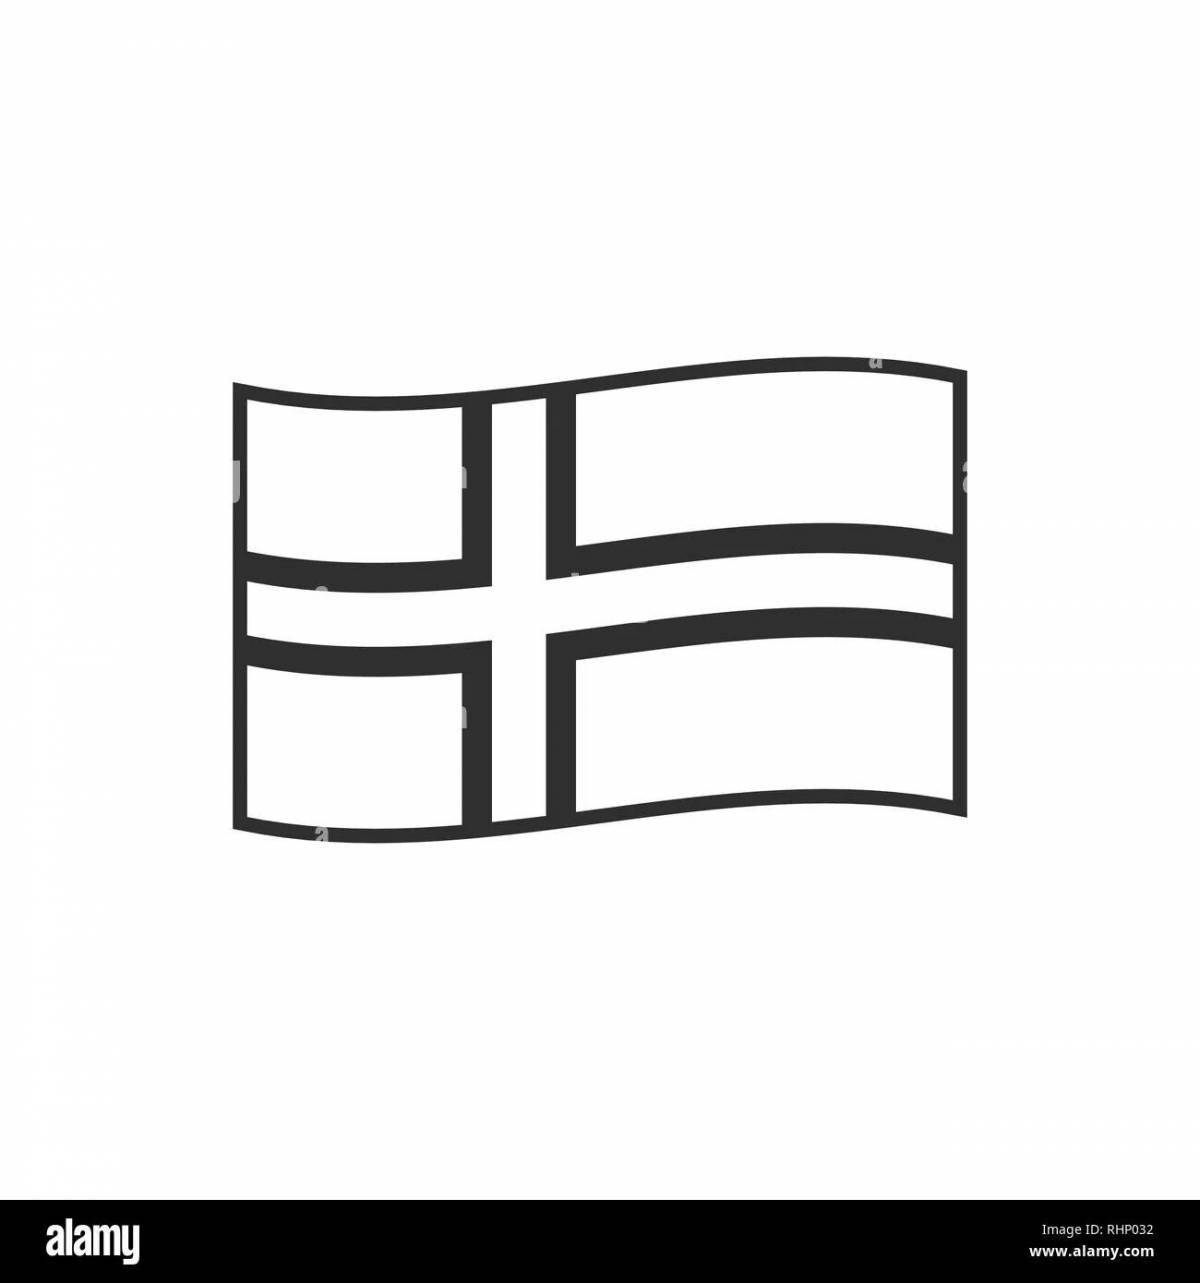 Fancy norway flag coloring page